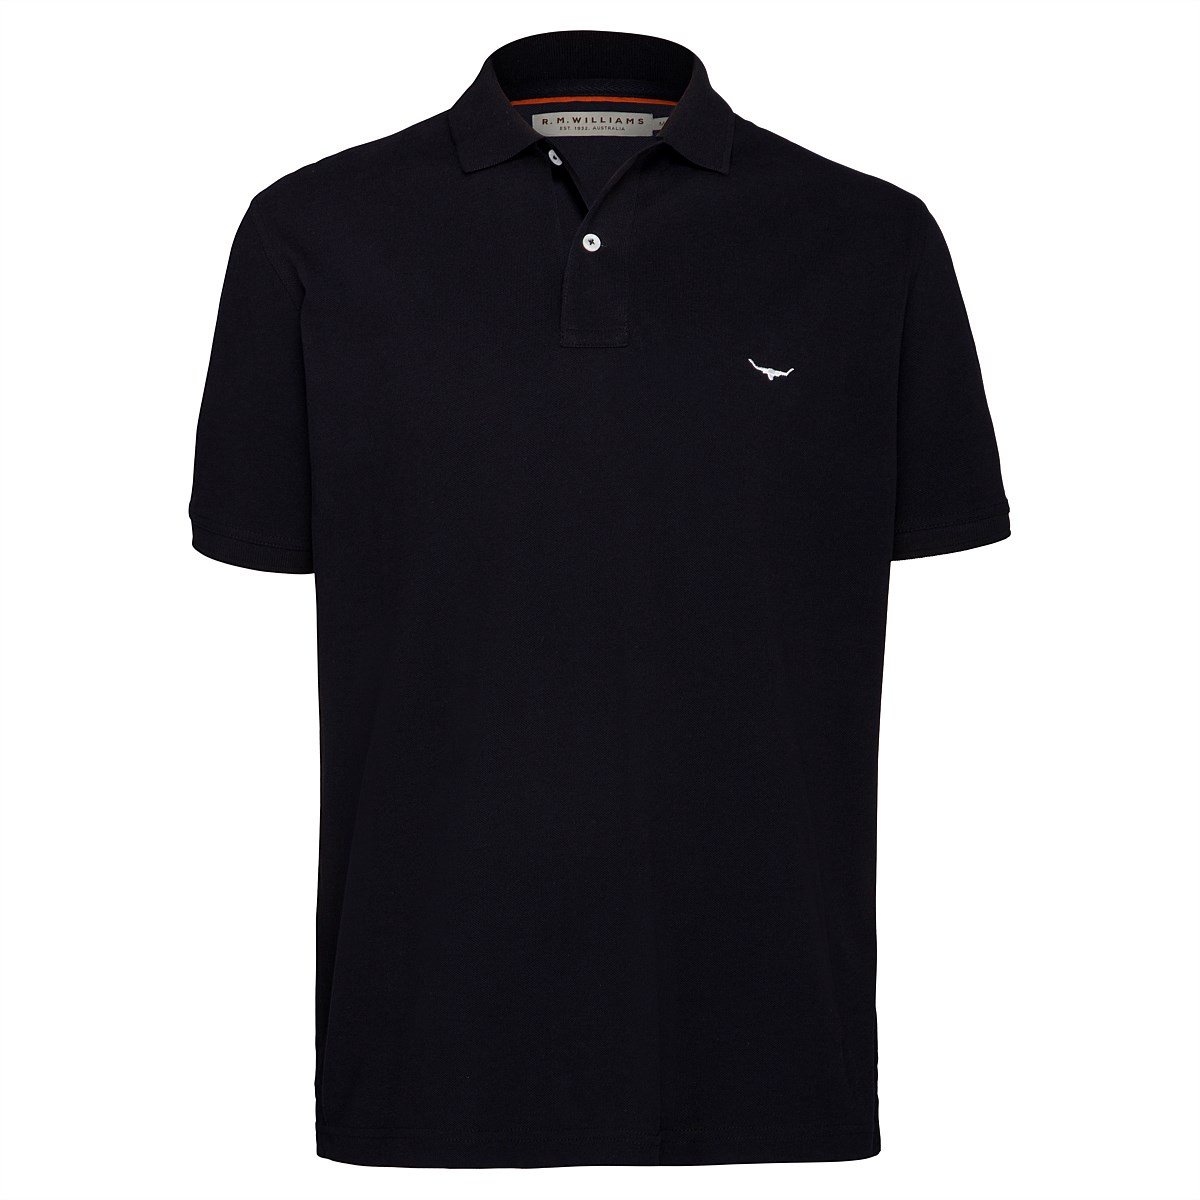 Men's Shirts & Tops Online | Air New Zealand's Airpoints™ Store